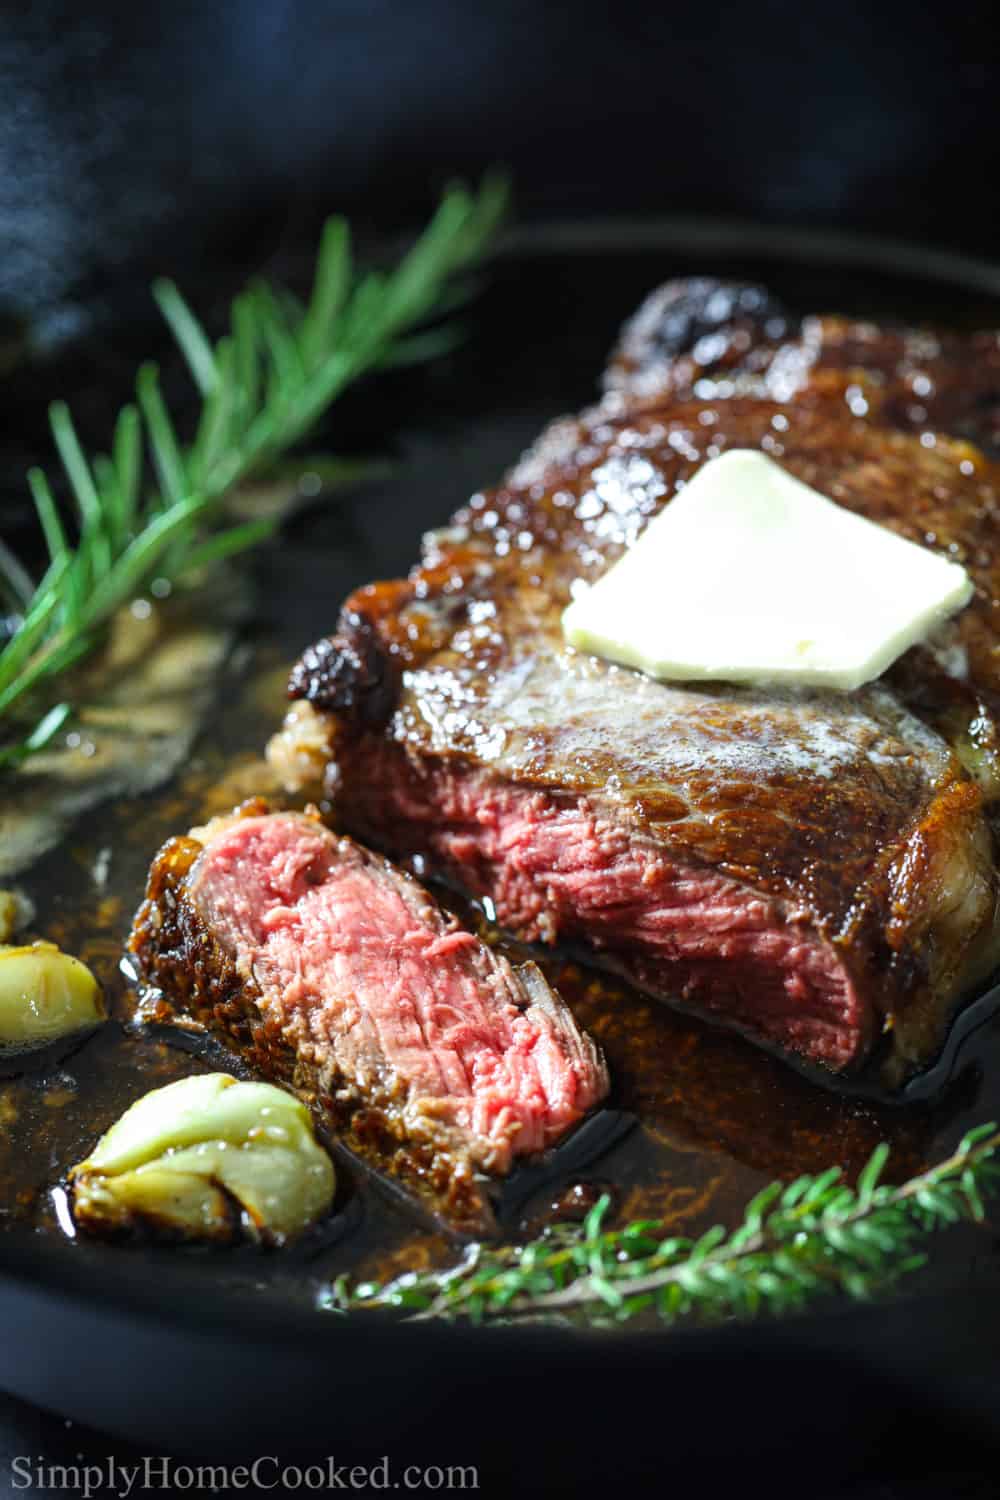 https://simplyhomecooked.com/wp-content/uploads/2020/02/ribeye-steak-in-the-oven-8-scaled.jpg